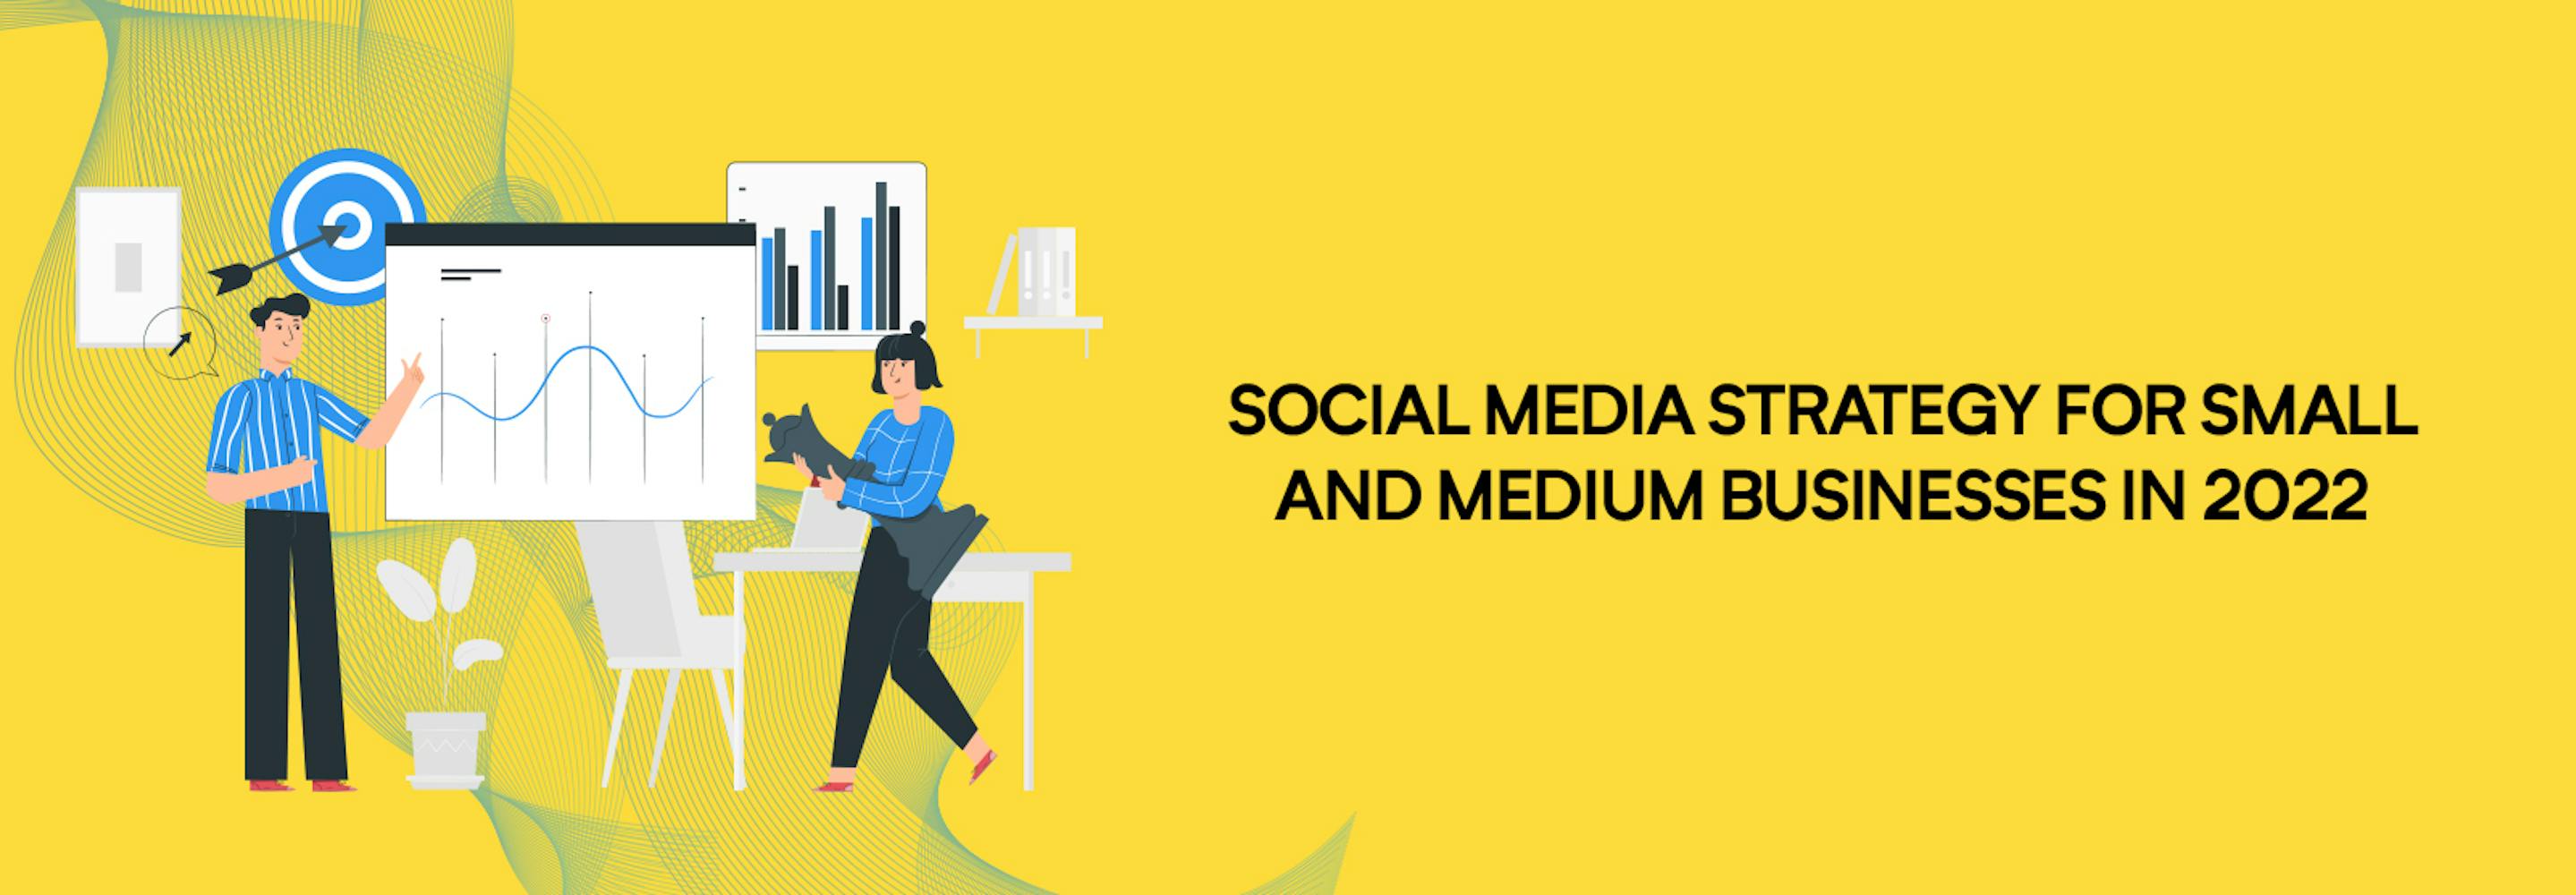 Social Media Strategy For Small And Medium Businesses In 2022